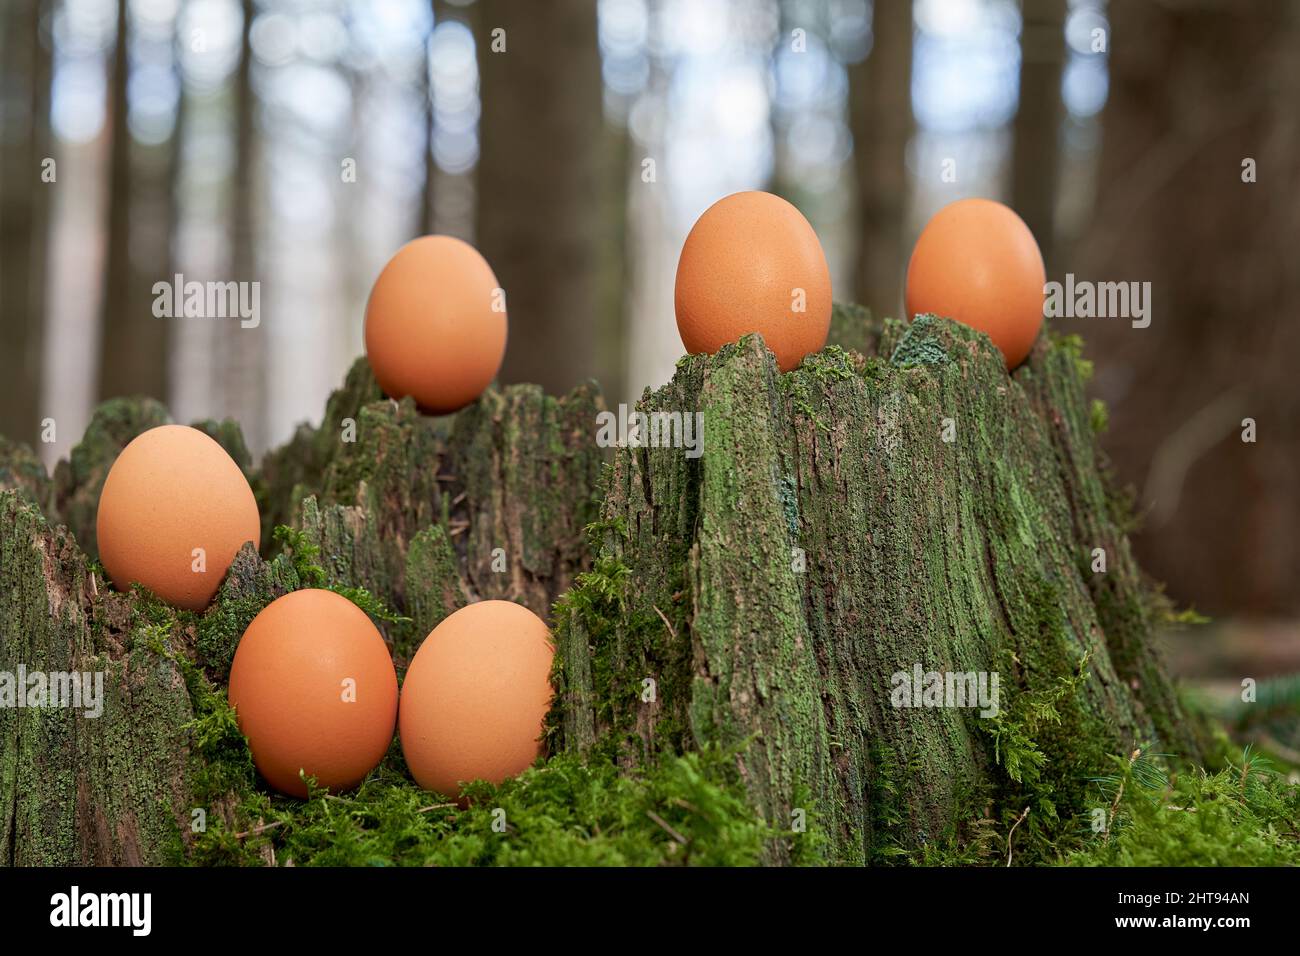 6 brown organic easter eggs on green tree stump in forest. Trees in depth blur. Stock Photo